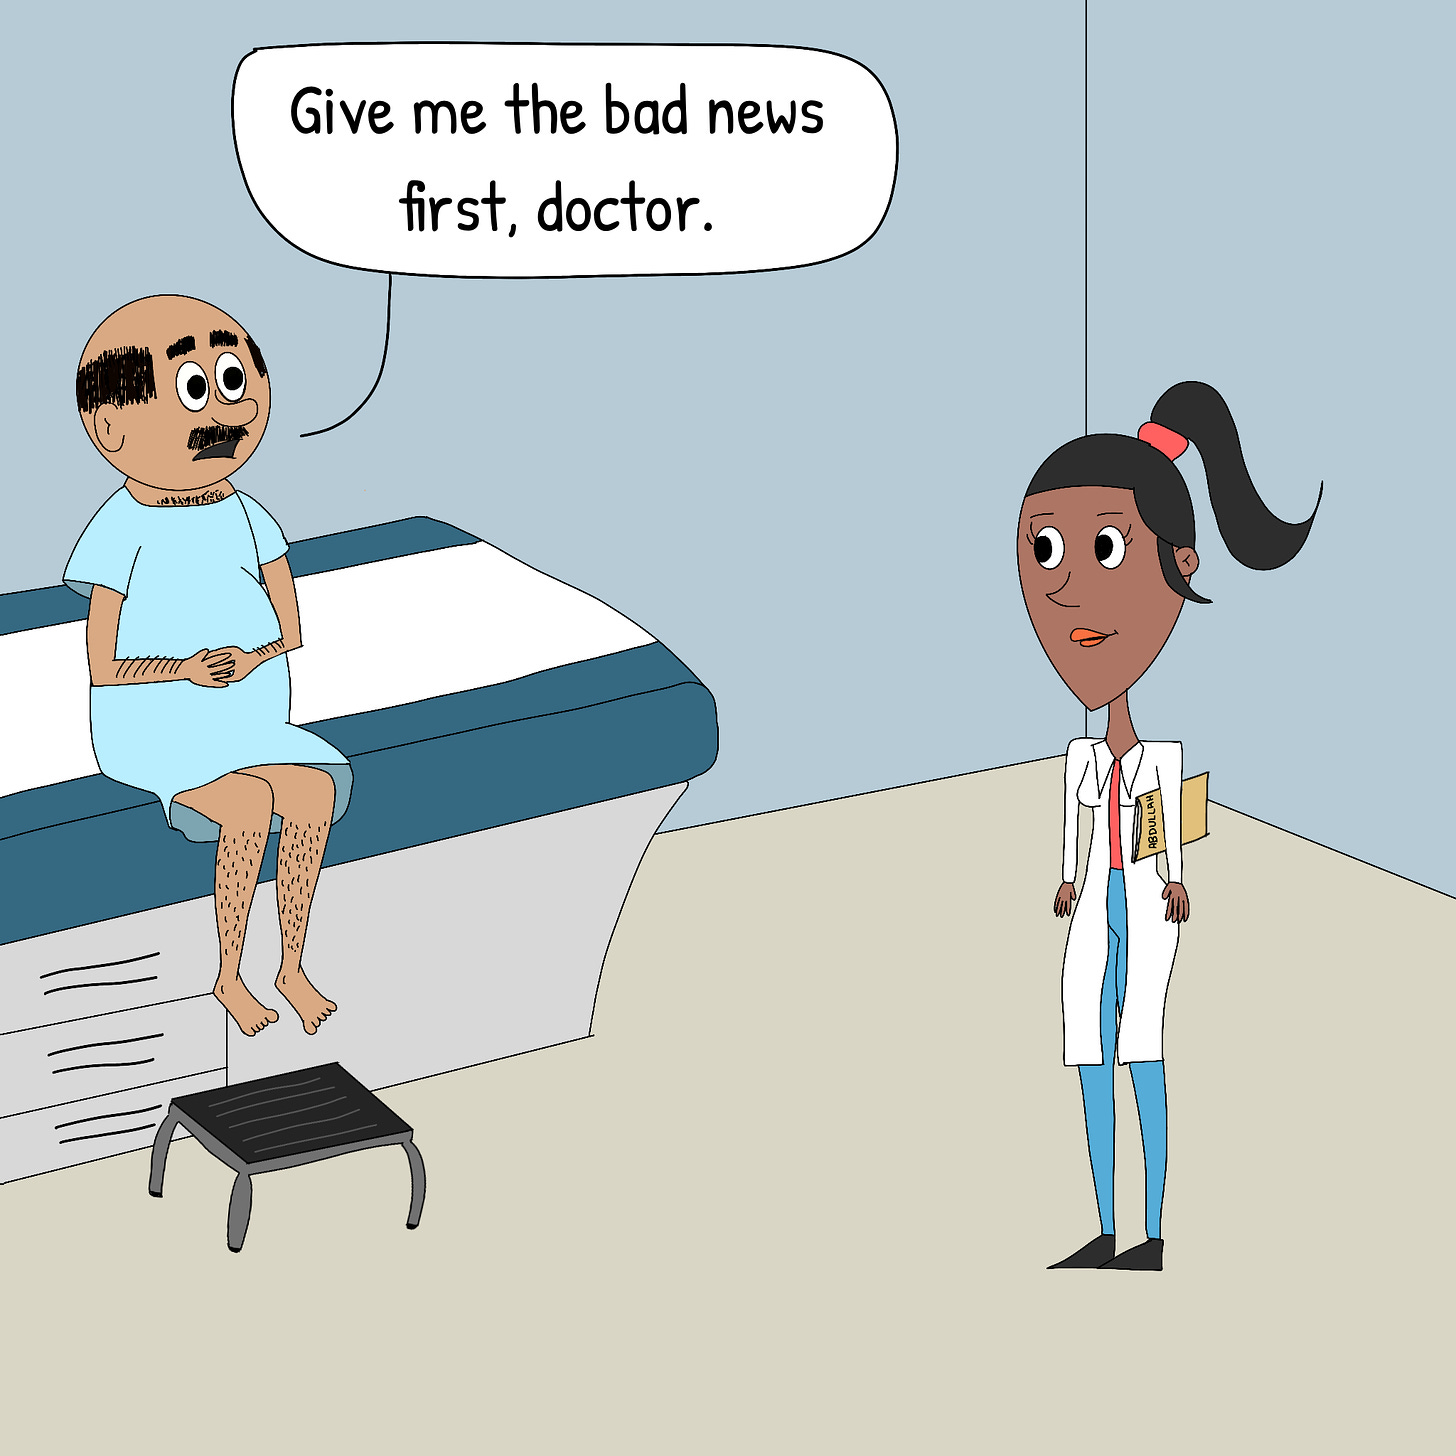 Panel 2: "Give me the bad news first, doctor" says Mr. Abdullah.